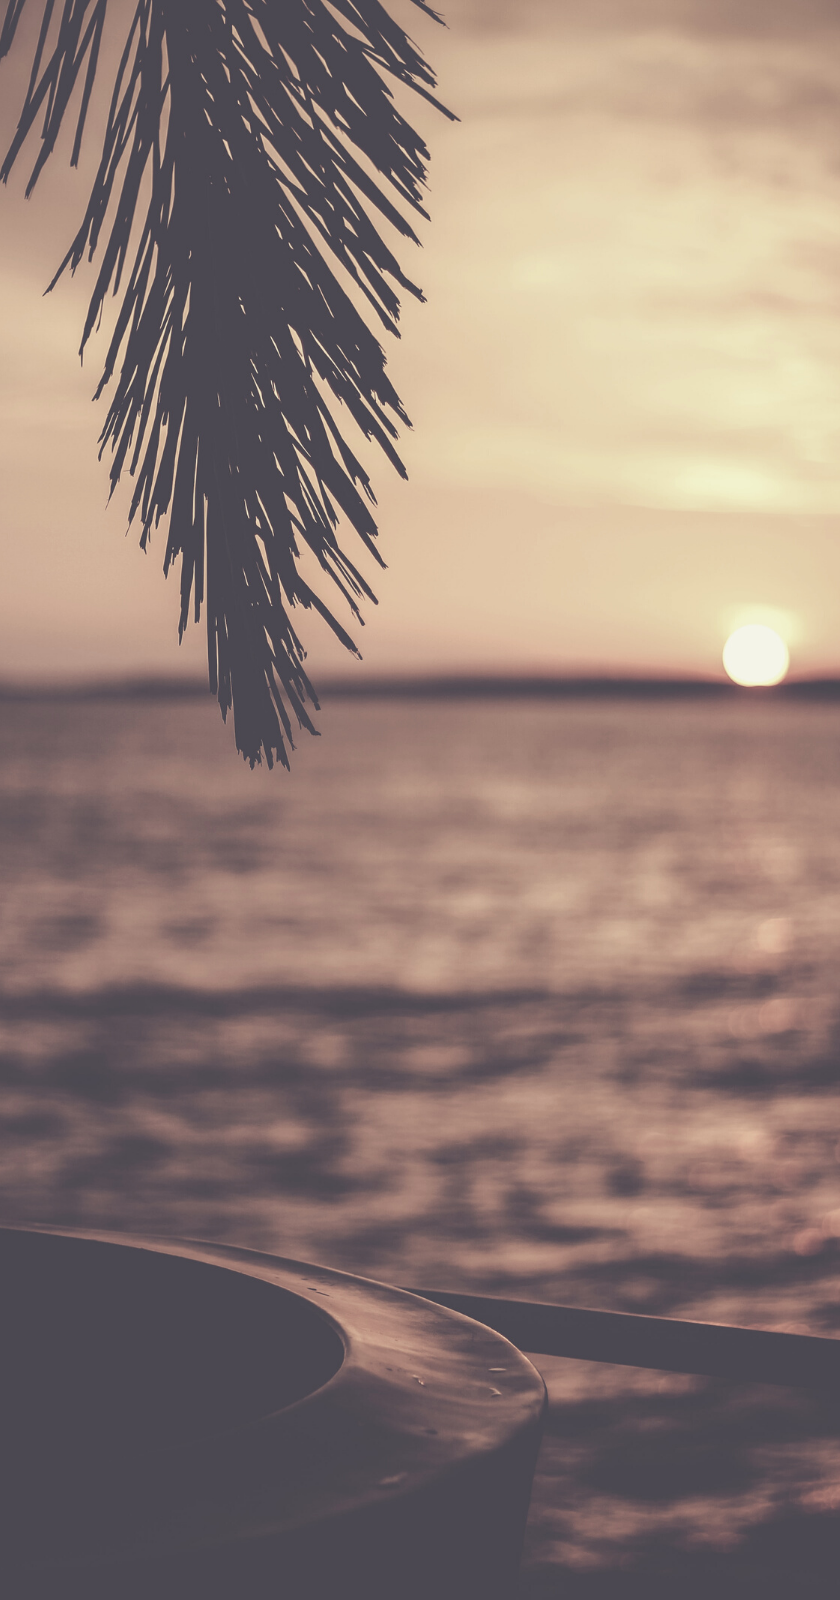 Summer aesthetic background for iPhone and Android. Sunset wallpaper, Landscape wallpaper, Sunset image